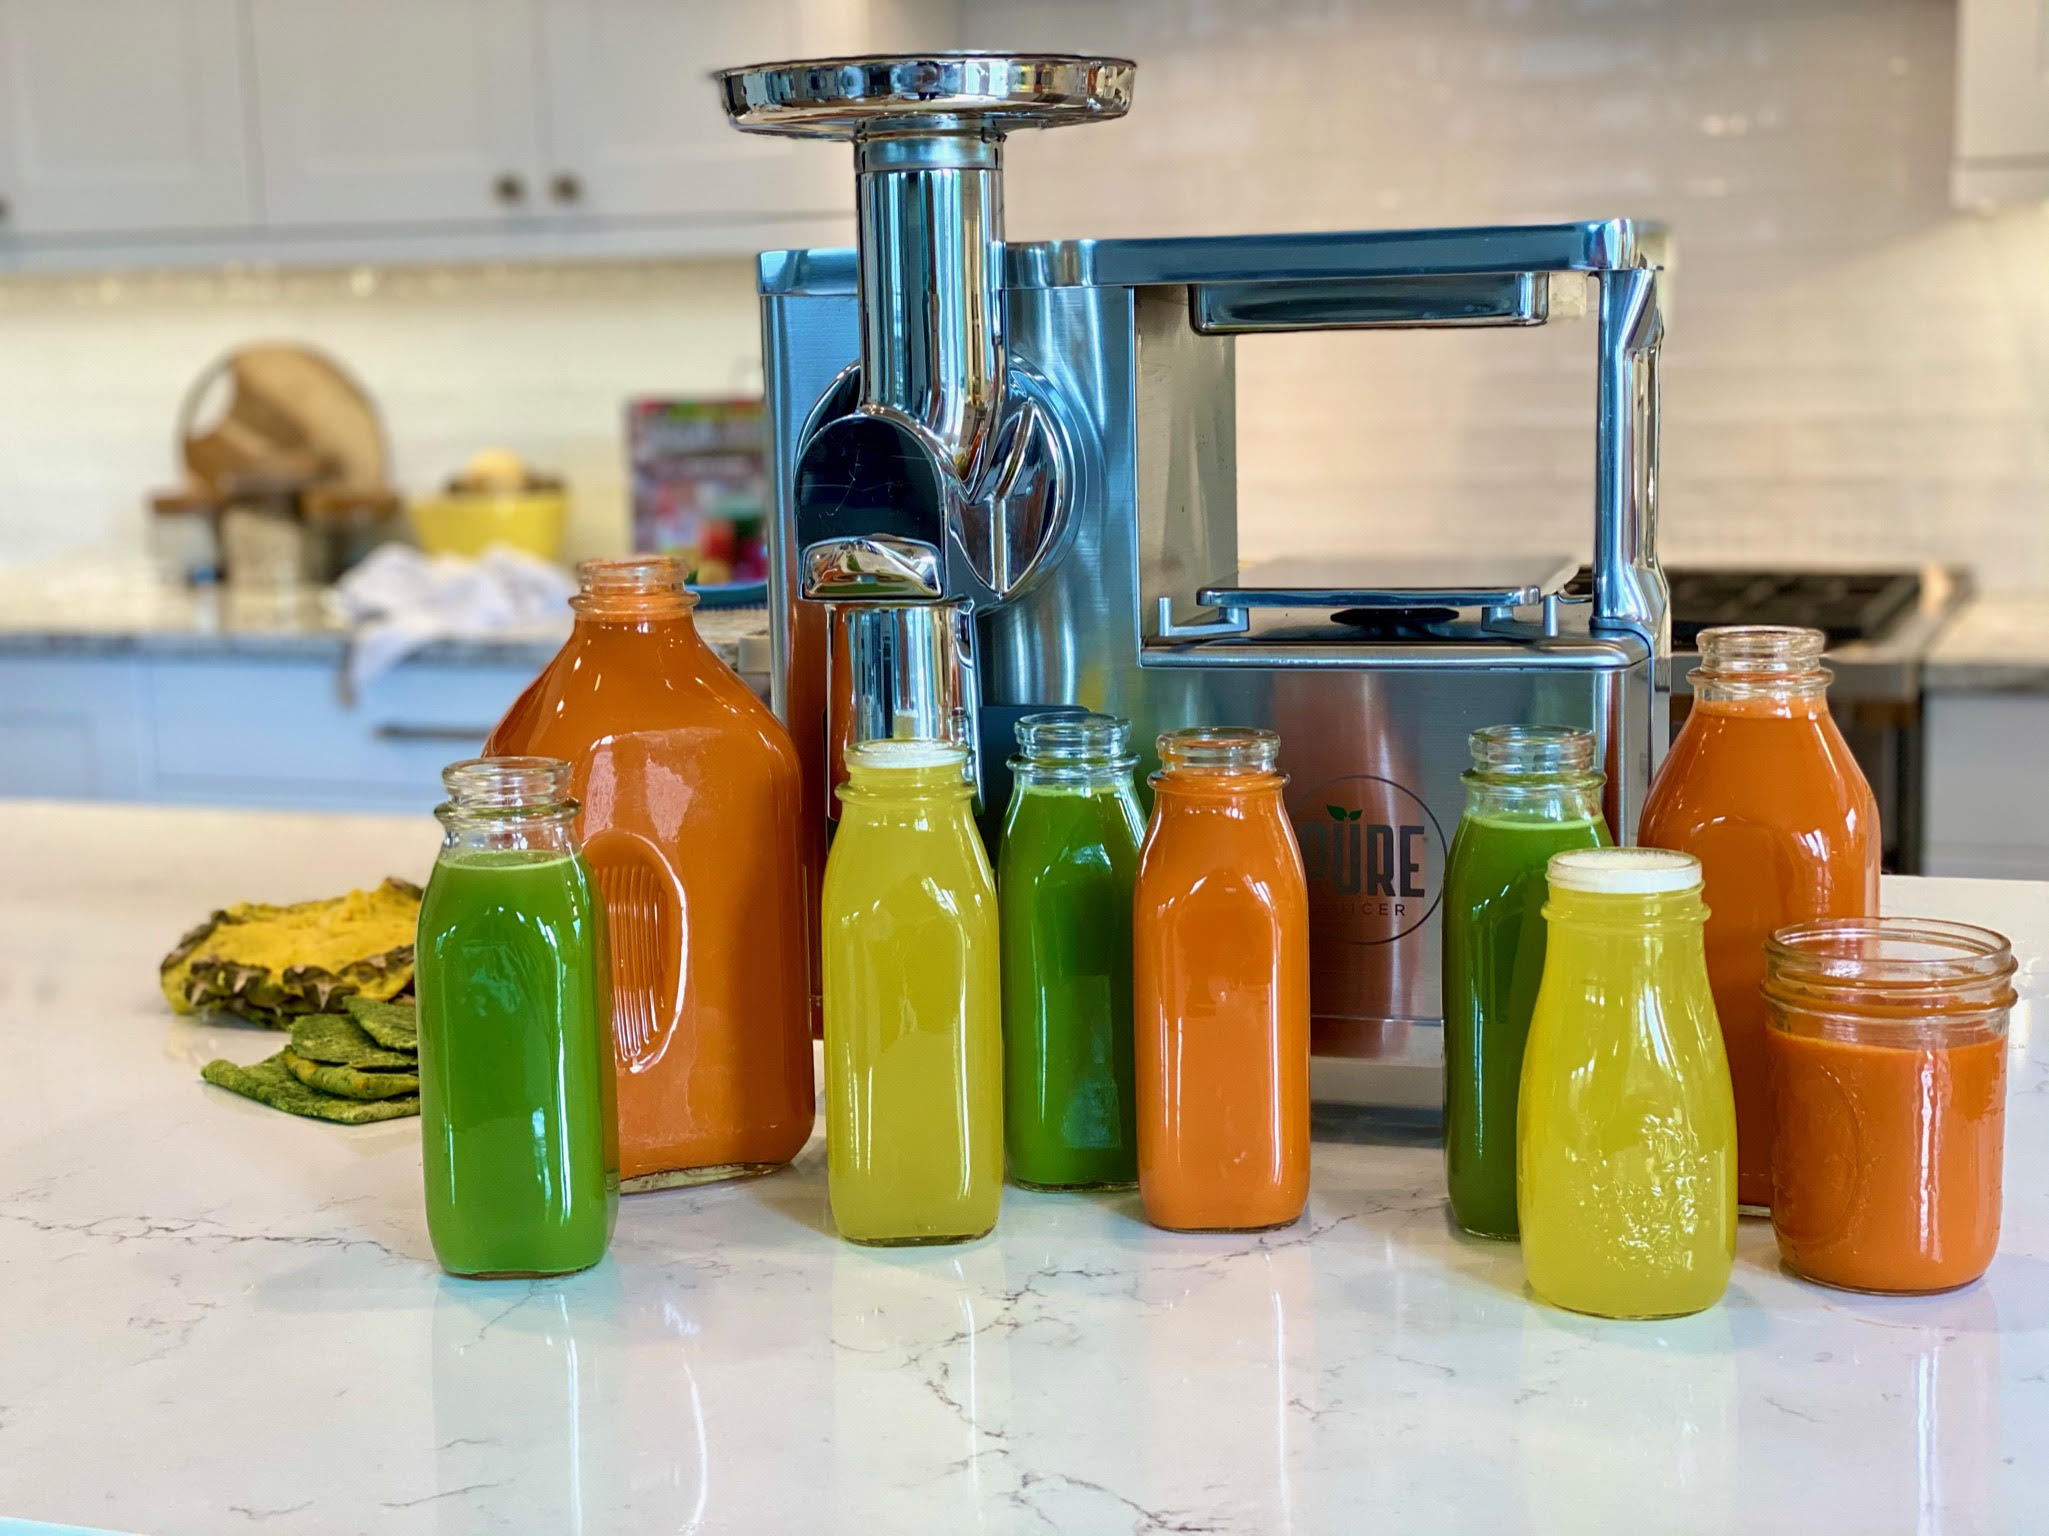 A line of glass bottles lined up in front of the PURE Juicer, in a rainbow